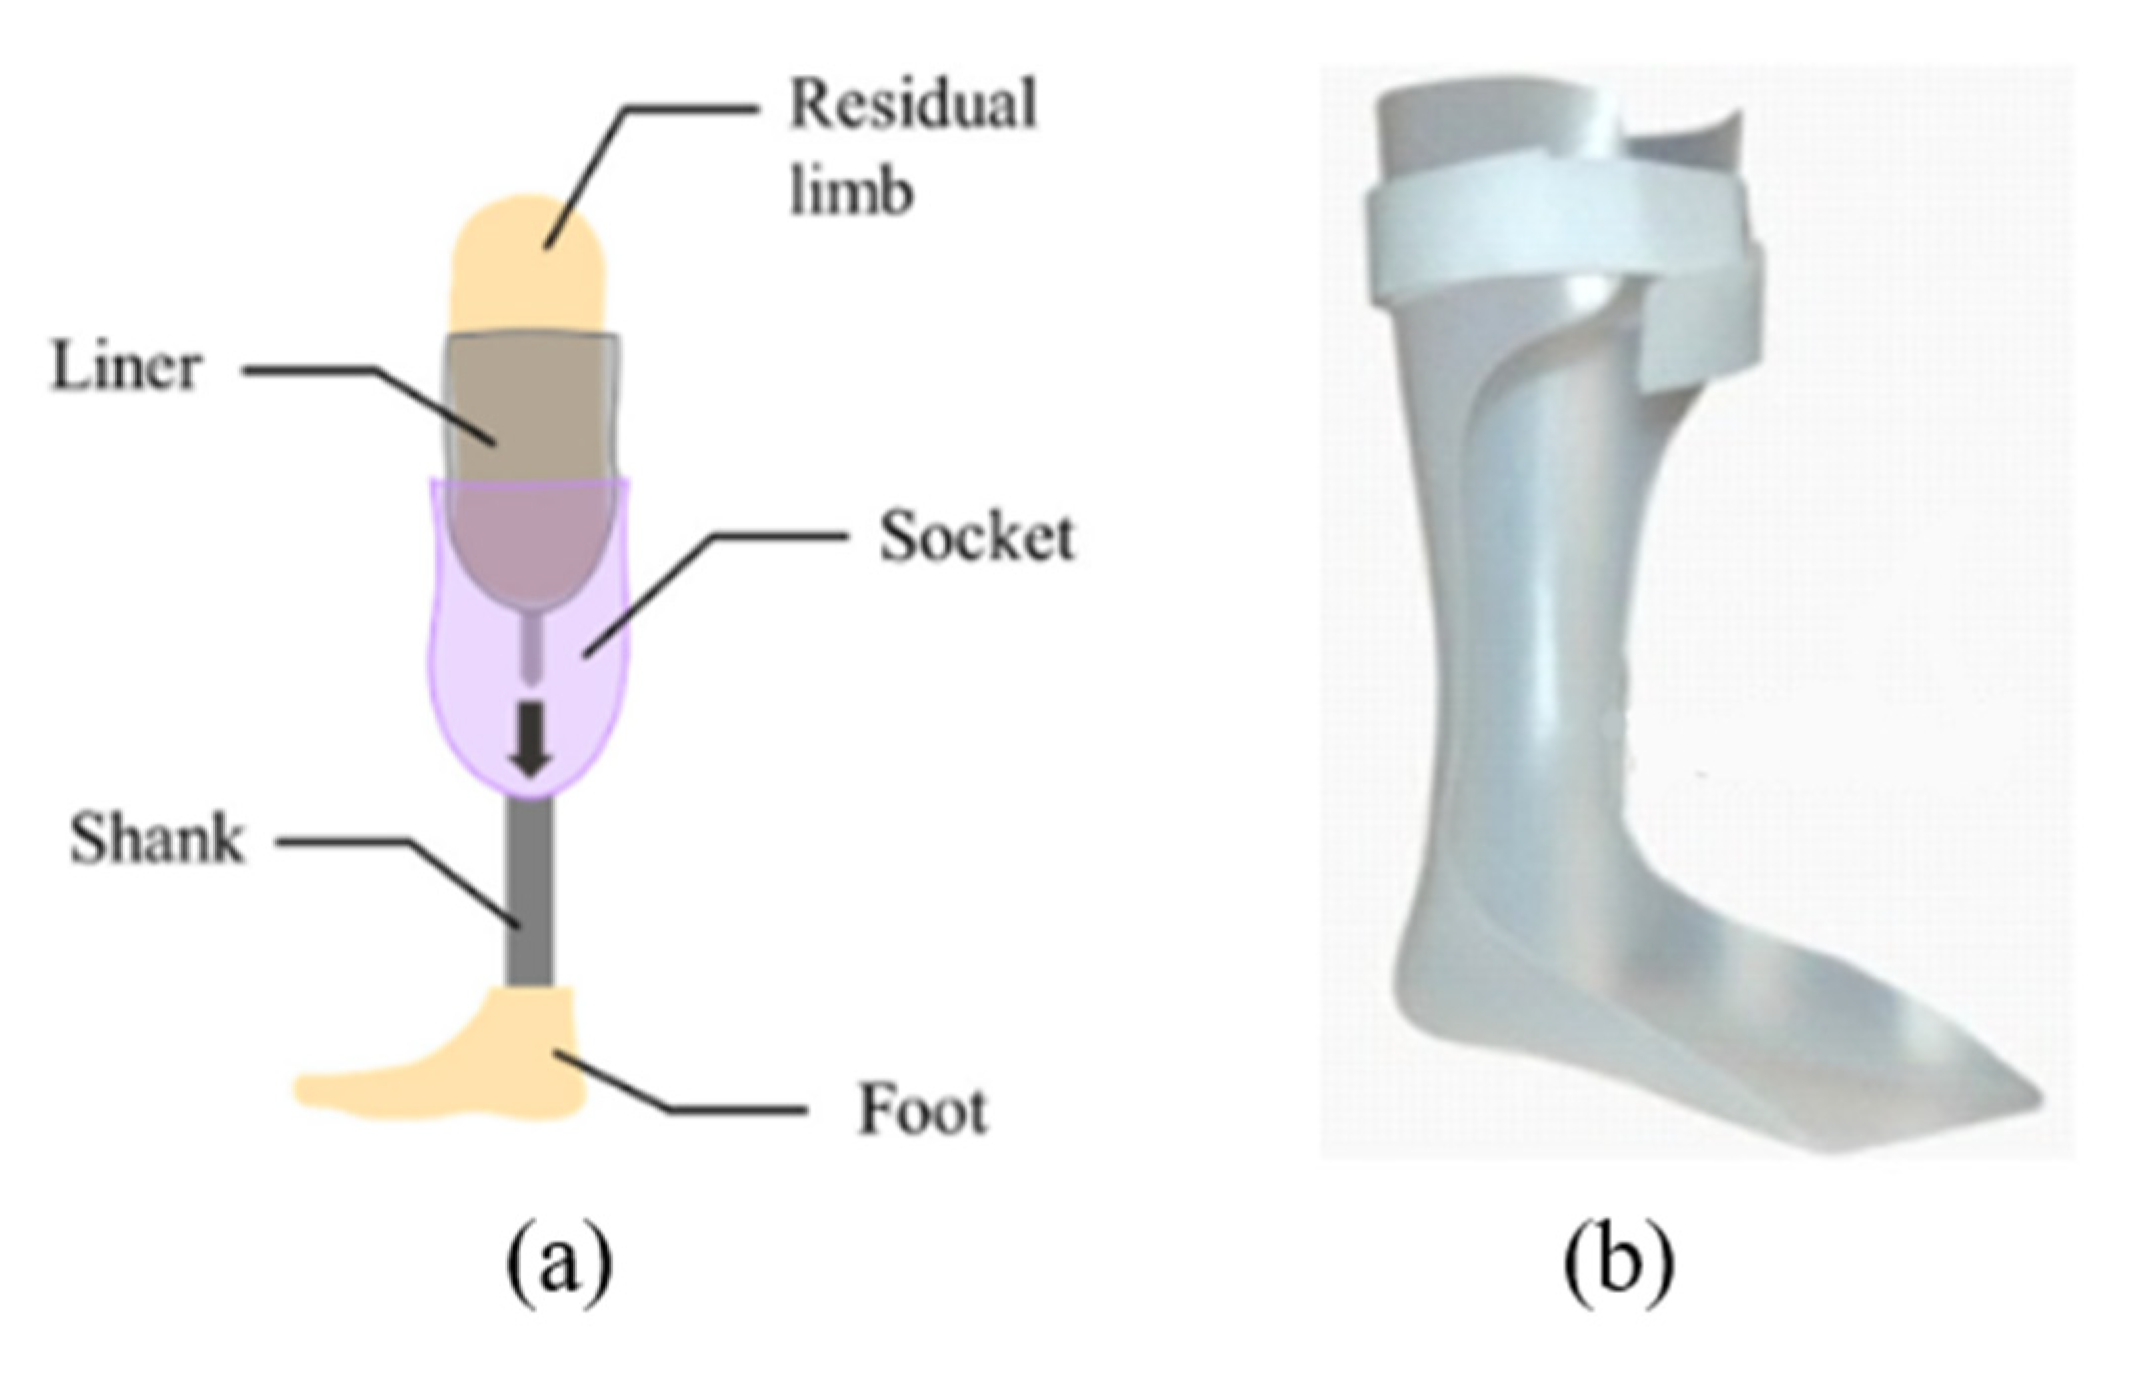 a. Above: Realistic prosthetic limb for upper limb loss made of